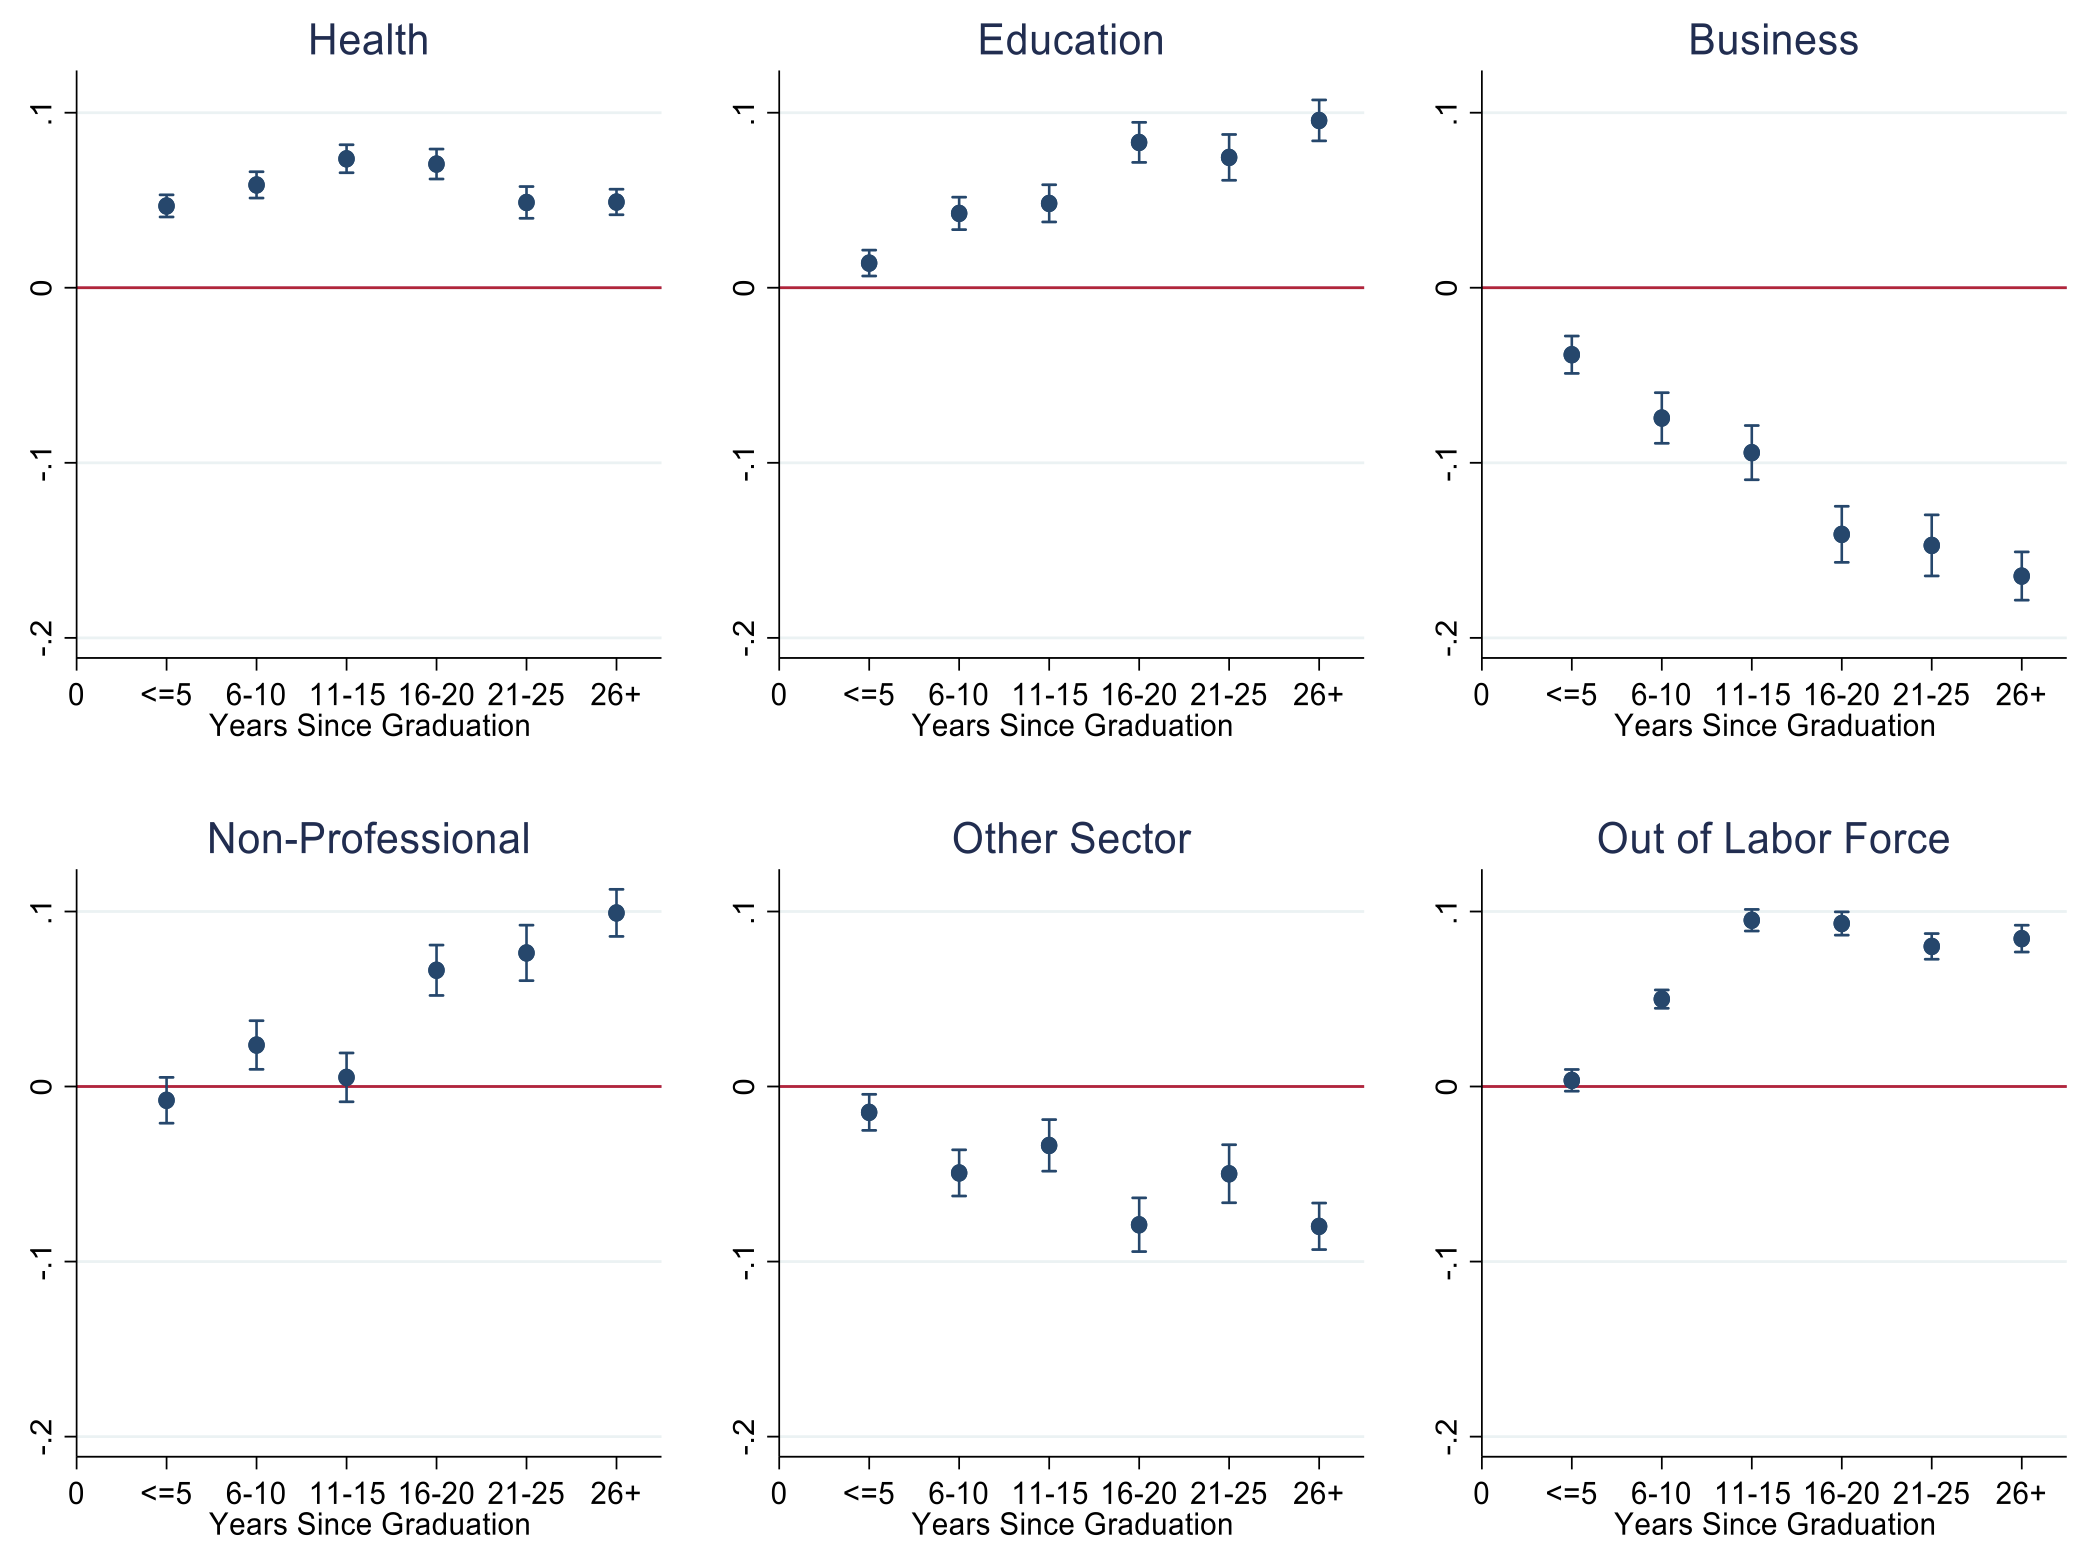 Gender differences in probability of STEM graduates working in different sectors